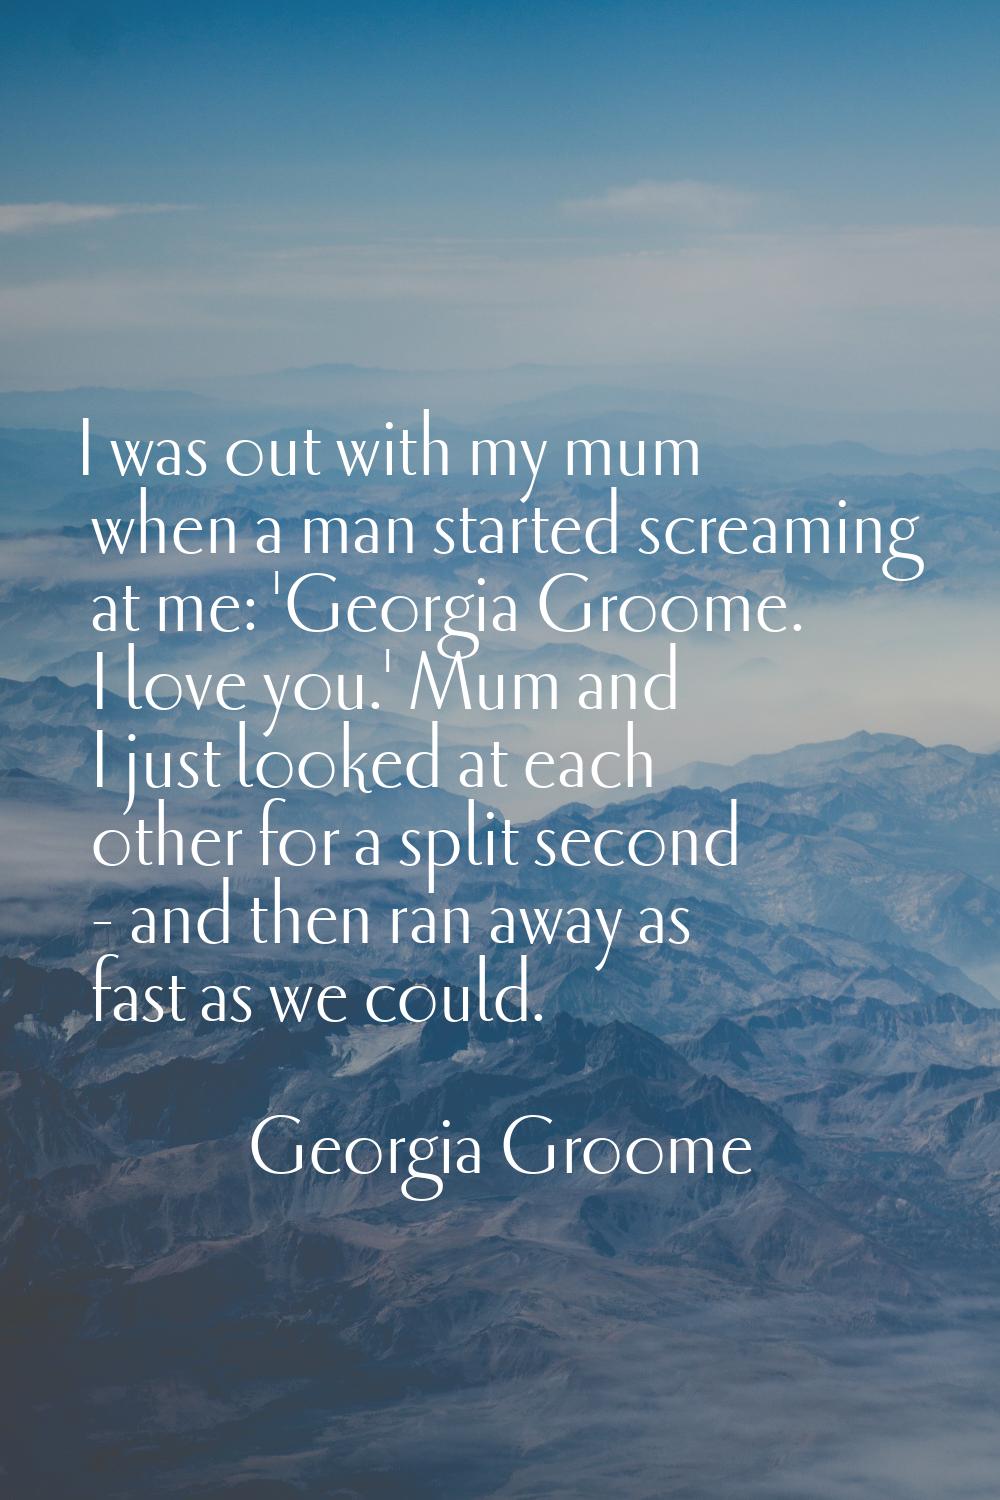 I was out with my mum when a man started screaming at me: 'Georgia Groome. I love you.' Mum and I j